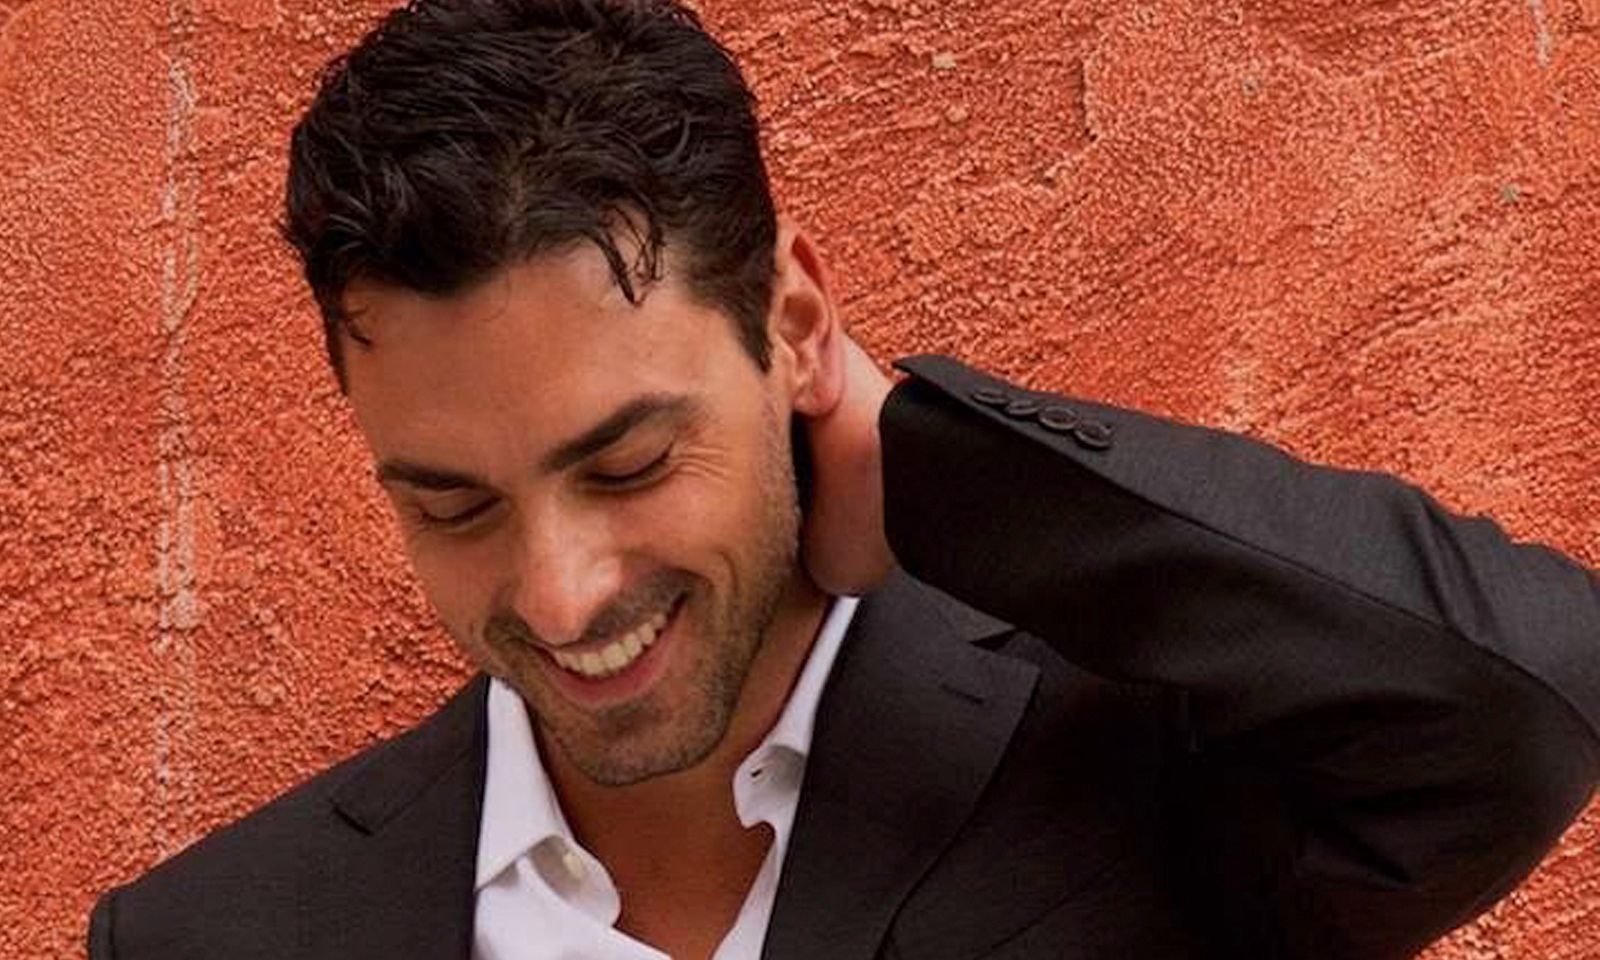 Ryan Driller Featured In Stormy Daniels' Latest Feature